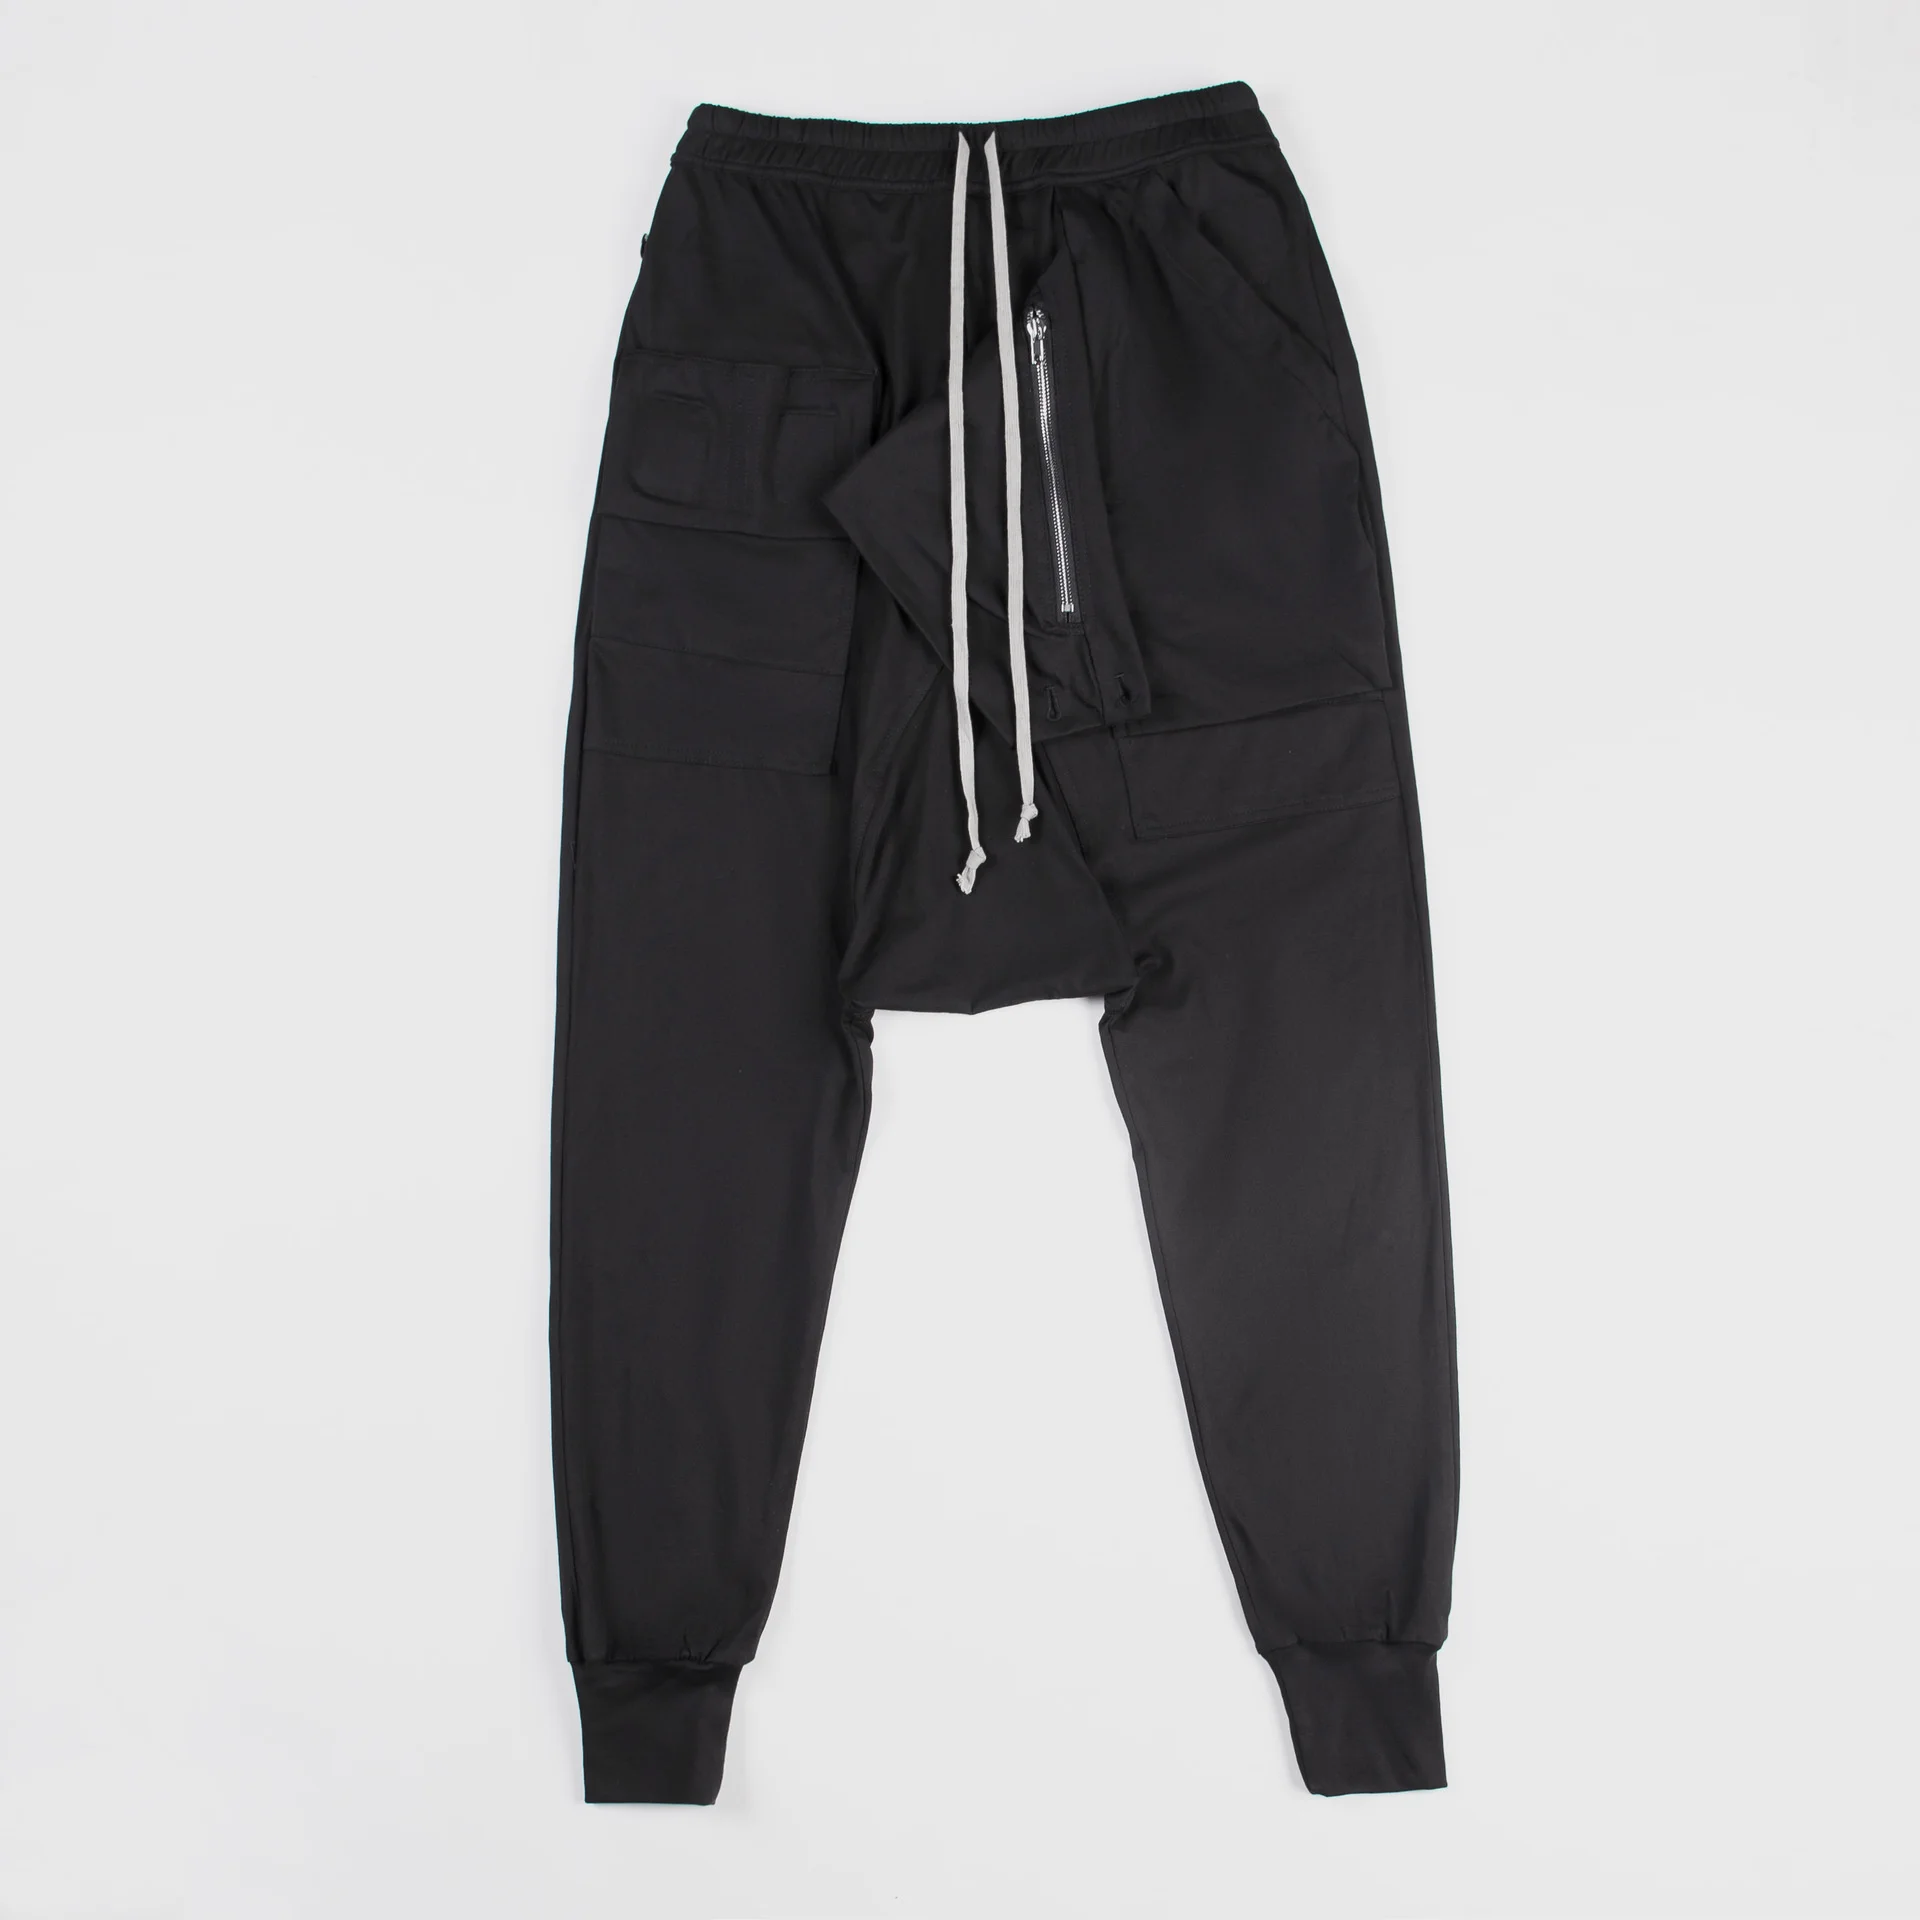 

Rick New Sweatpants Owens High Street Dark Ro Knitted Pure Cotton DS Button Harlan Pants Men